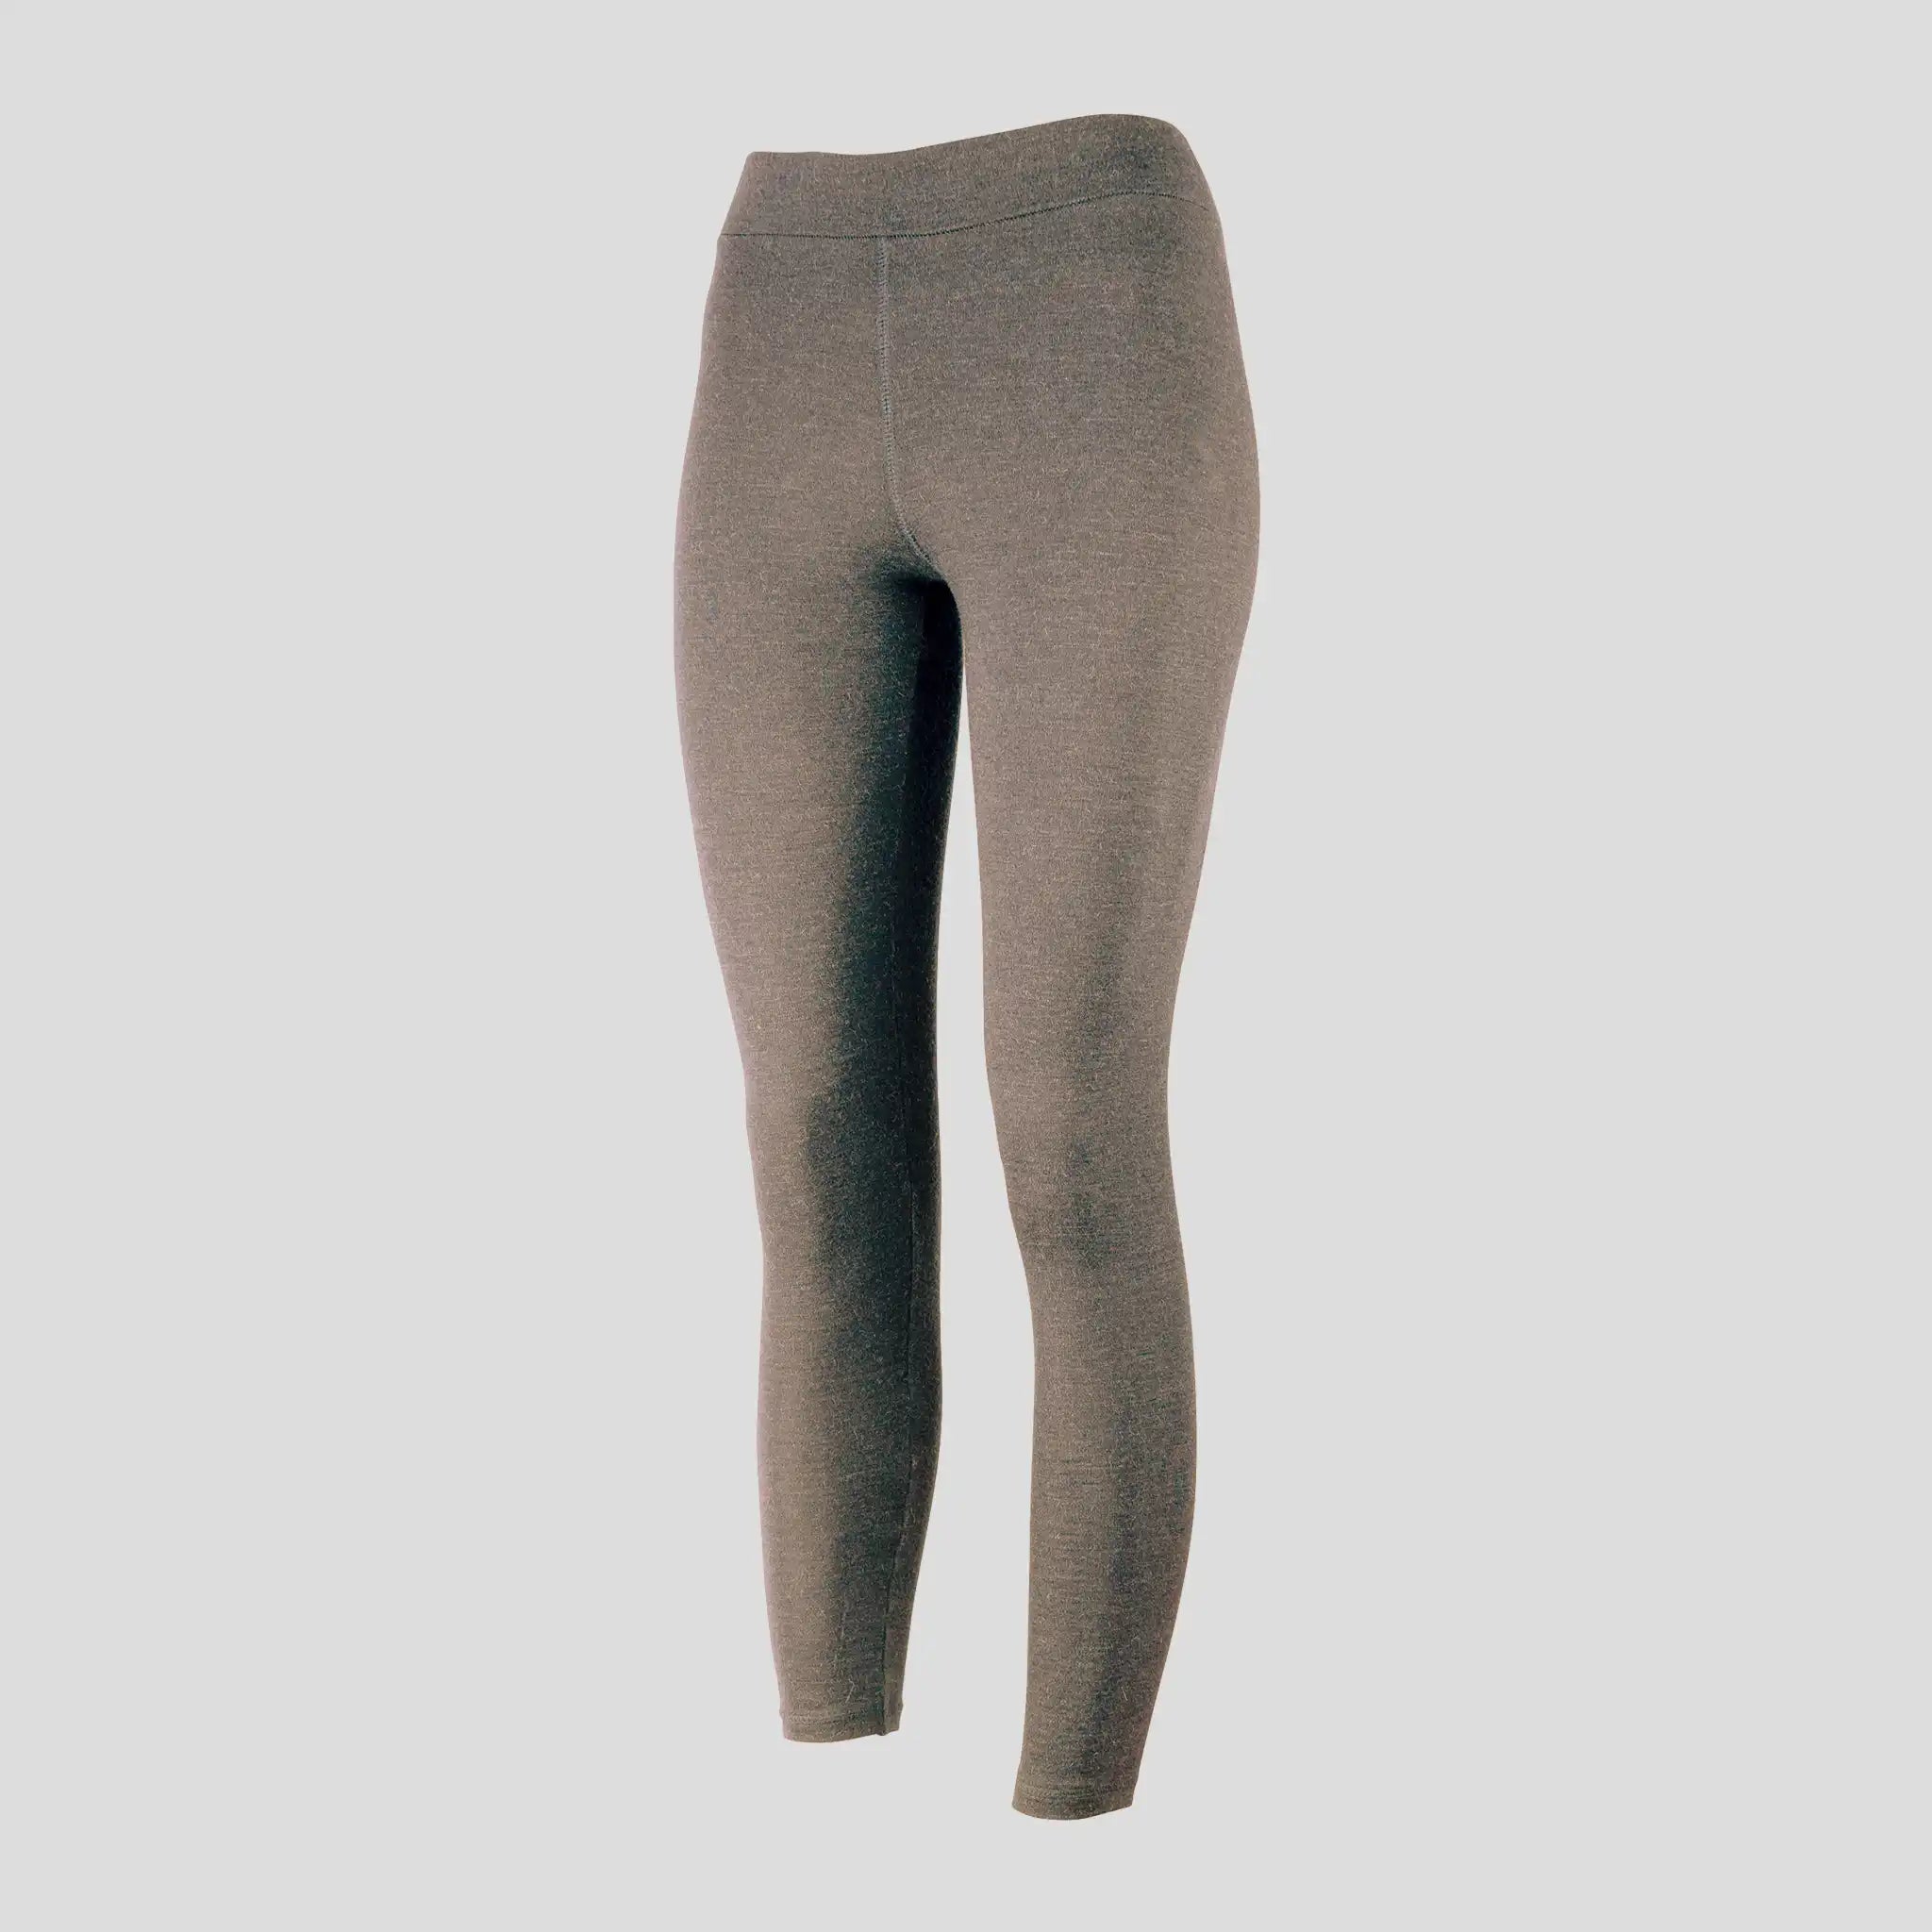 READY TO SHIP Knitted Warm Leggings for Women Skinny Alpaca Pants